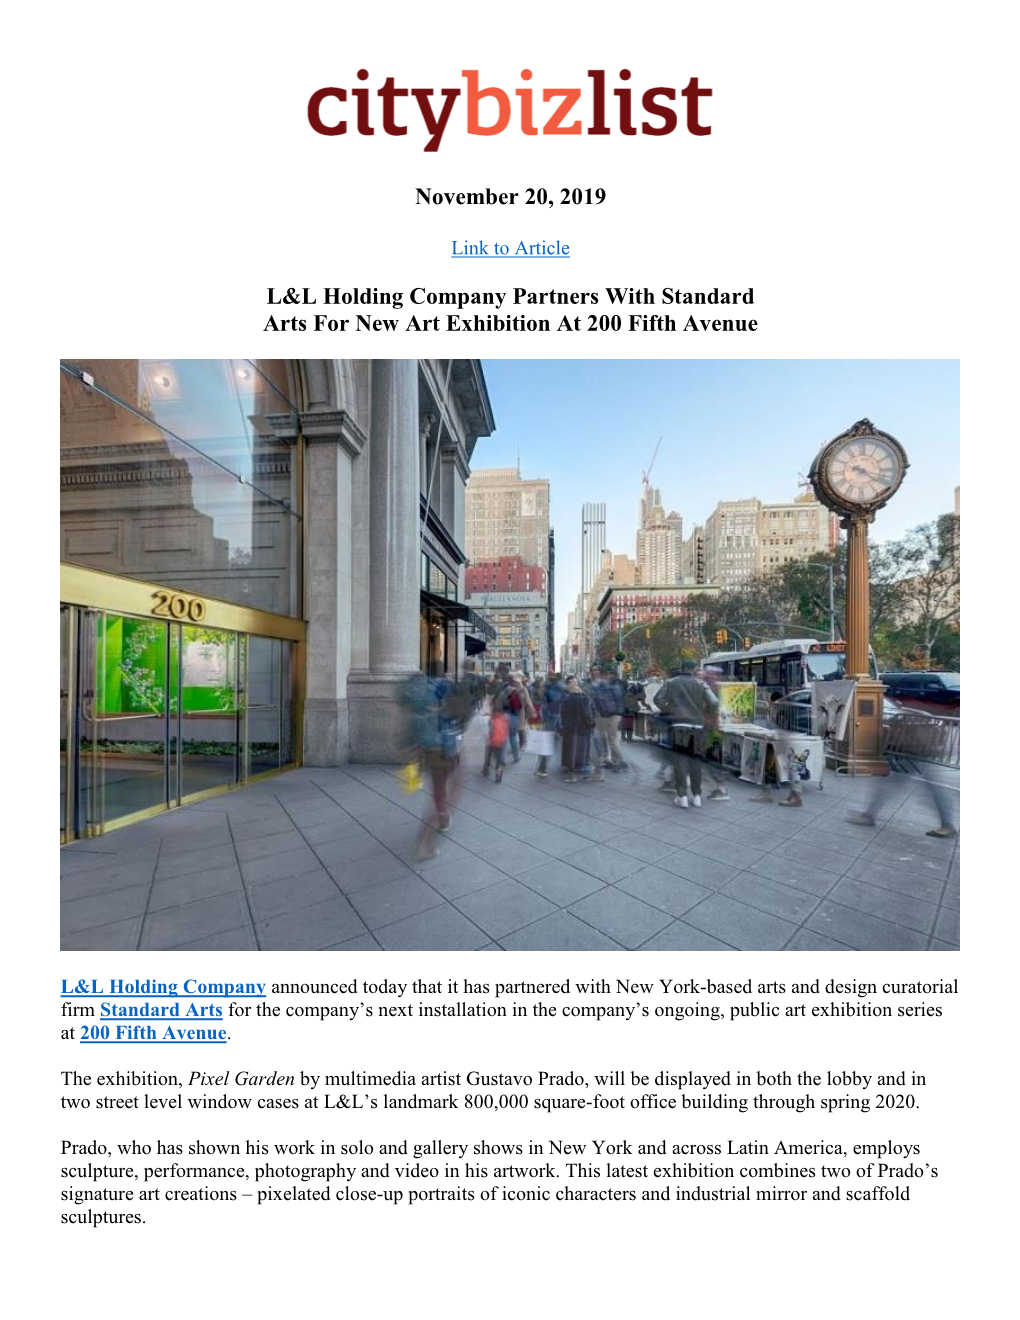 November 20, 2019 L&L Holding Company Partners with Standard Arts for New Art Exhibition at 200 Fifth Avenue